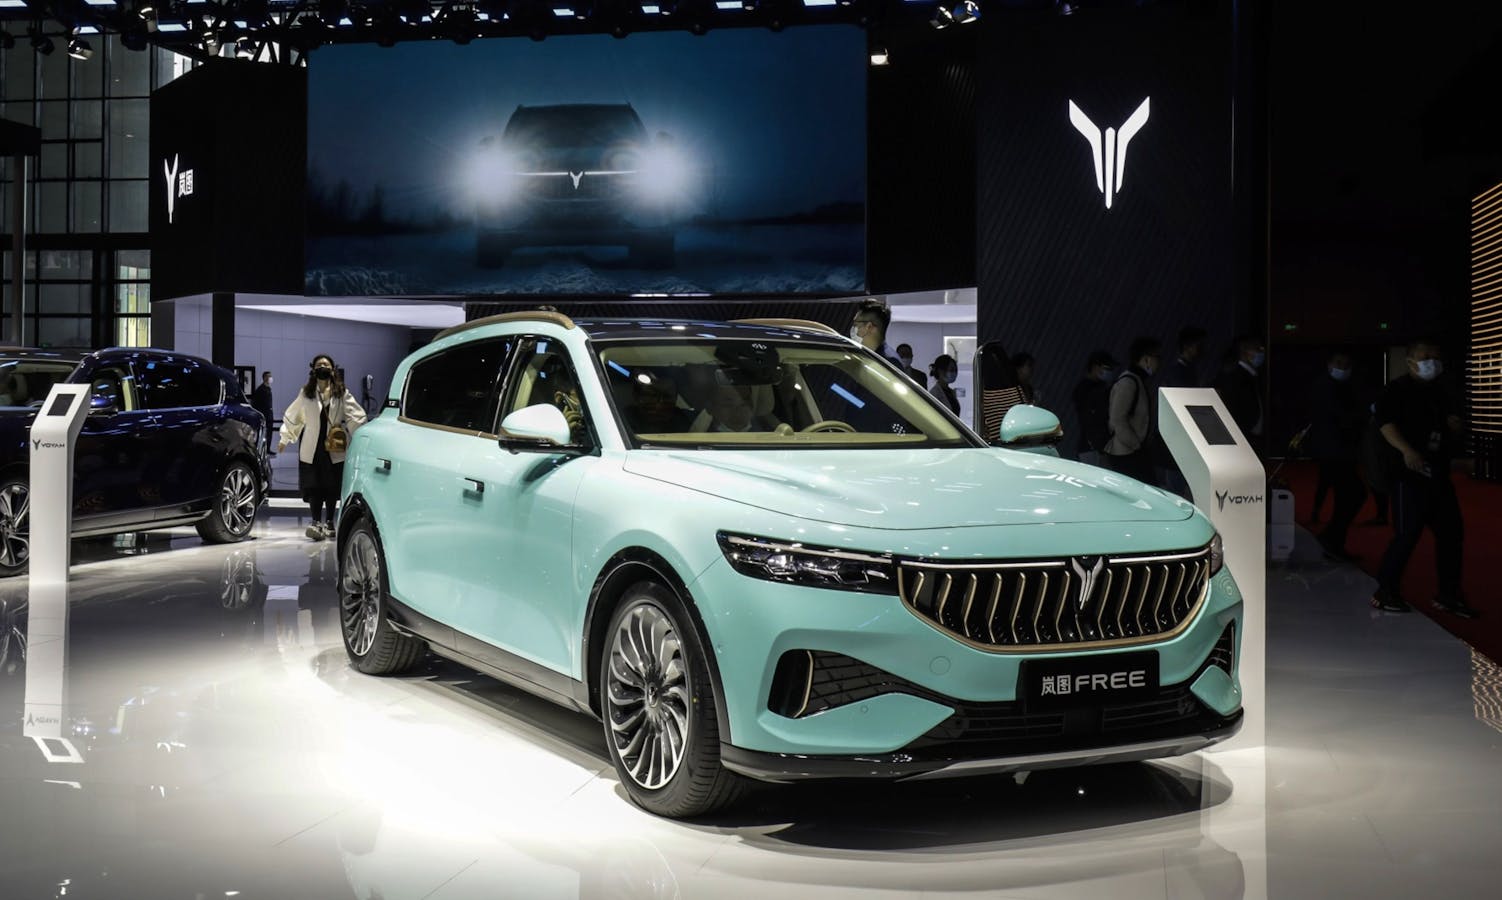 The Voyah Free SUV is among the challengers to Tesla's luxury crown in China. Photo by Bloomberg.